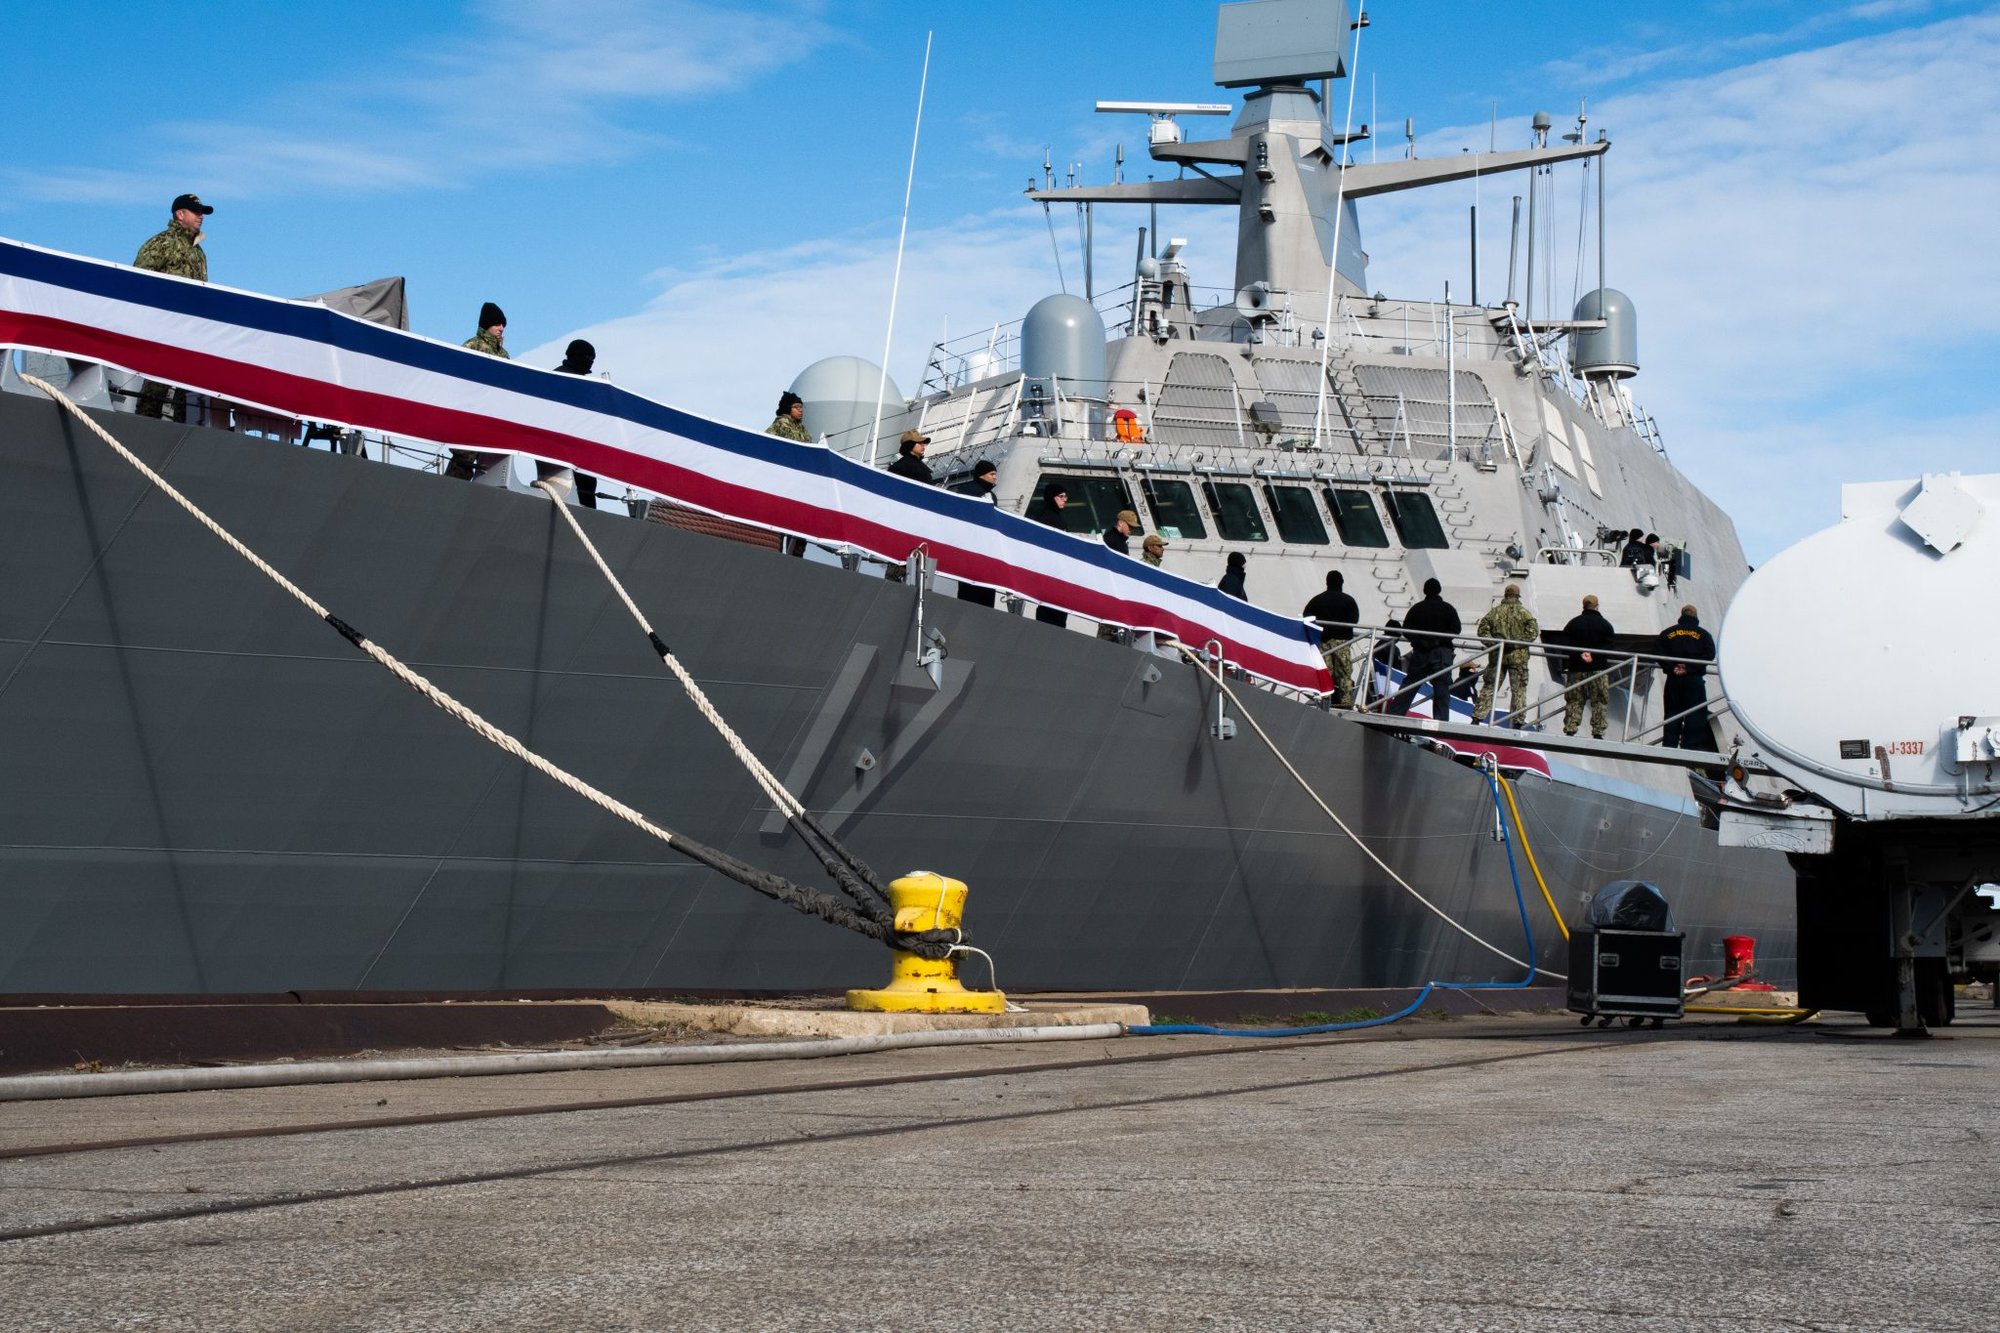 191023-N-UZ091-0011 BURNS HARBOR, Ind. (Oct. 23, 2019) The crew of the future USS Indianapolis (LCS 17) man the rails during a pre-commissioning rehearsal. LCS 17 is the 19th littoral combat ship to enter the fleet and the ninth of the Freedom-variant. It will be the fourth ship named for Indianapolis, Indiana’s capital city. (U.S. Navy Photo by Mass Communication Specialist 3rd Class Timothy Haggerty)